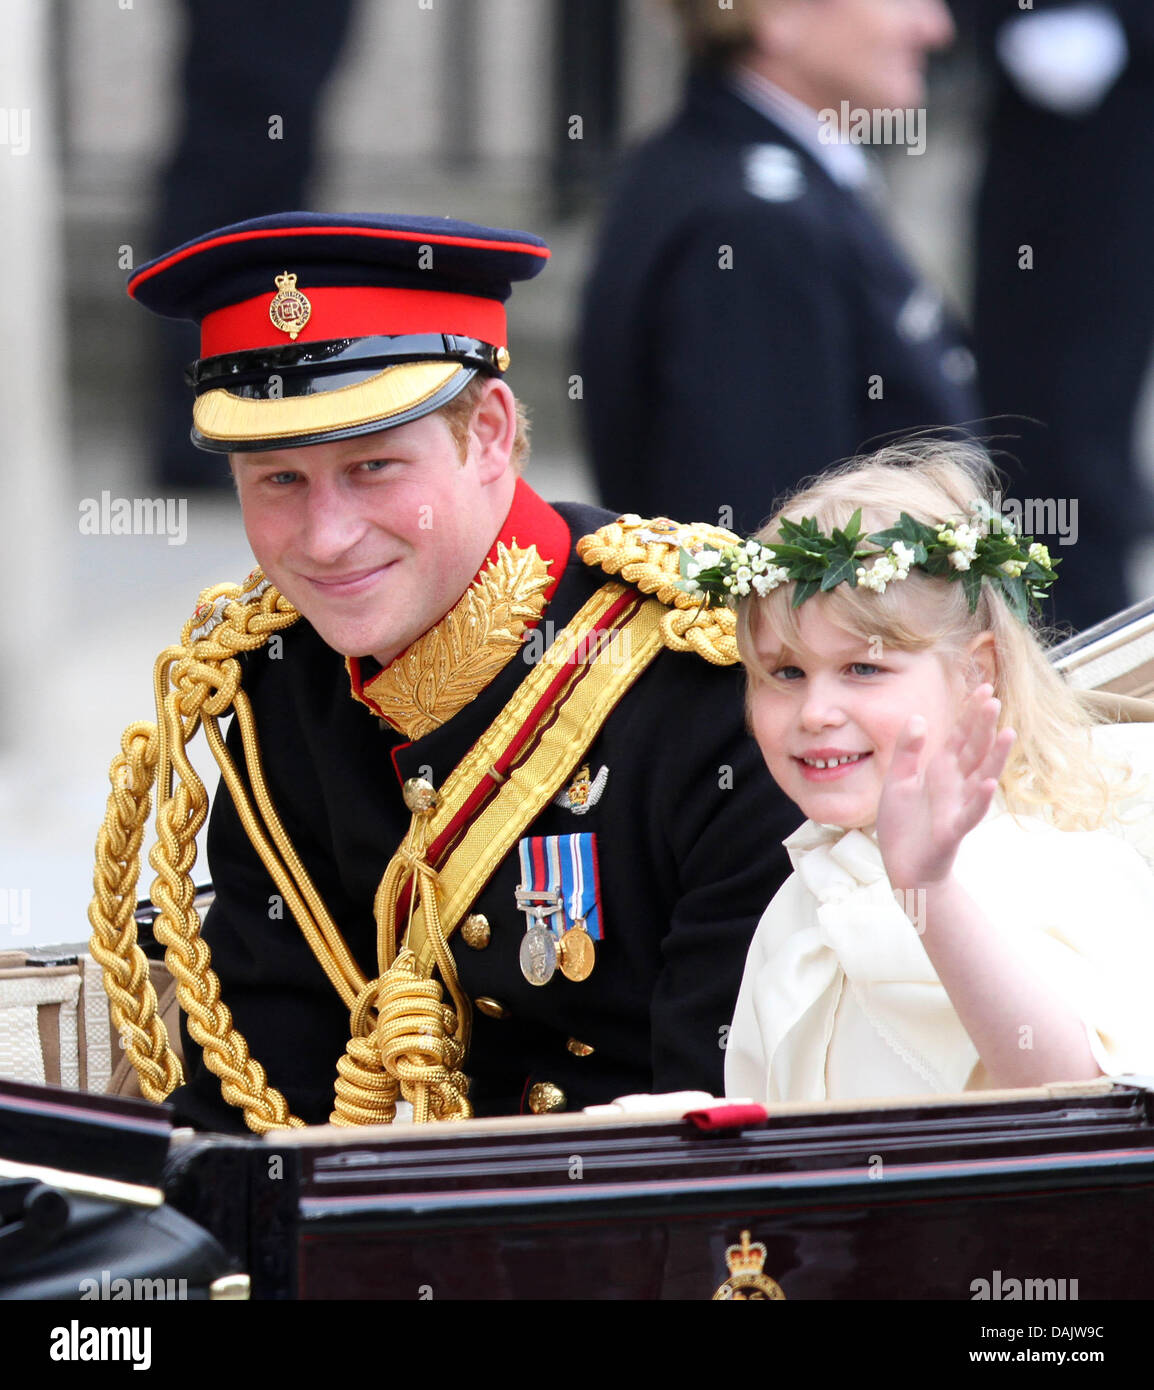 Prince Harry and Lady Louise Windsor ride in a horse-drawn carriage from Westminster Abbey to Buckingham Palace in London, Britain, 29 April 2011, after the wedding ceremony of Prince William and Kate Middleton. Some 1,900 guests followed the royal marriage ceremony of Prince William and Kate Middleton in the church. Photo: Albert Nieboer NETHERLANDS OUT Stock Photo